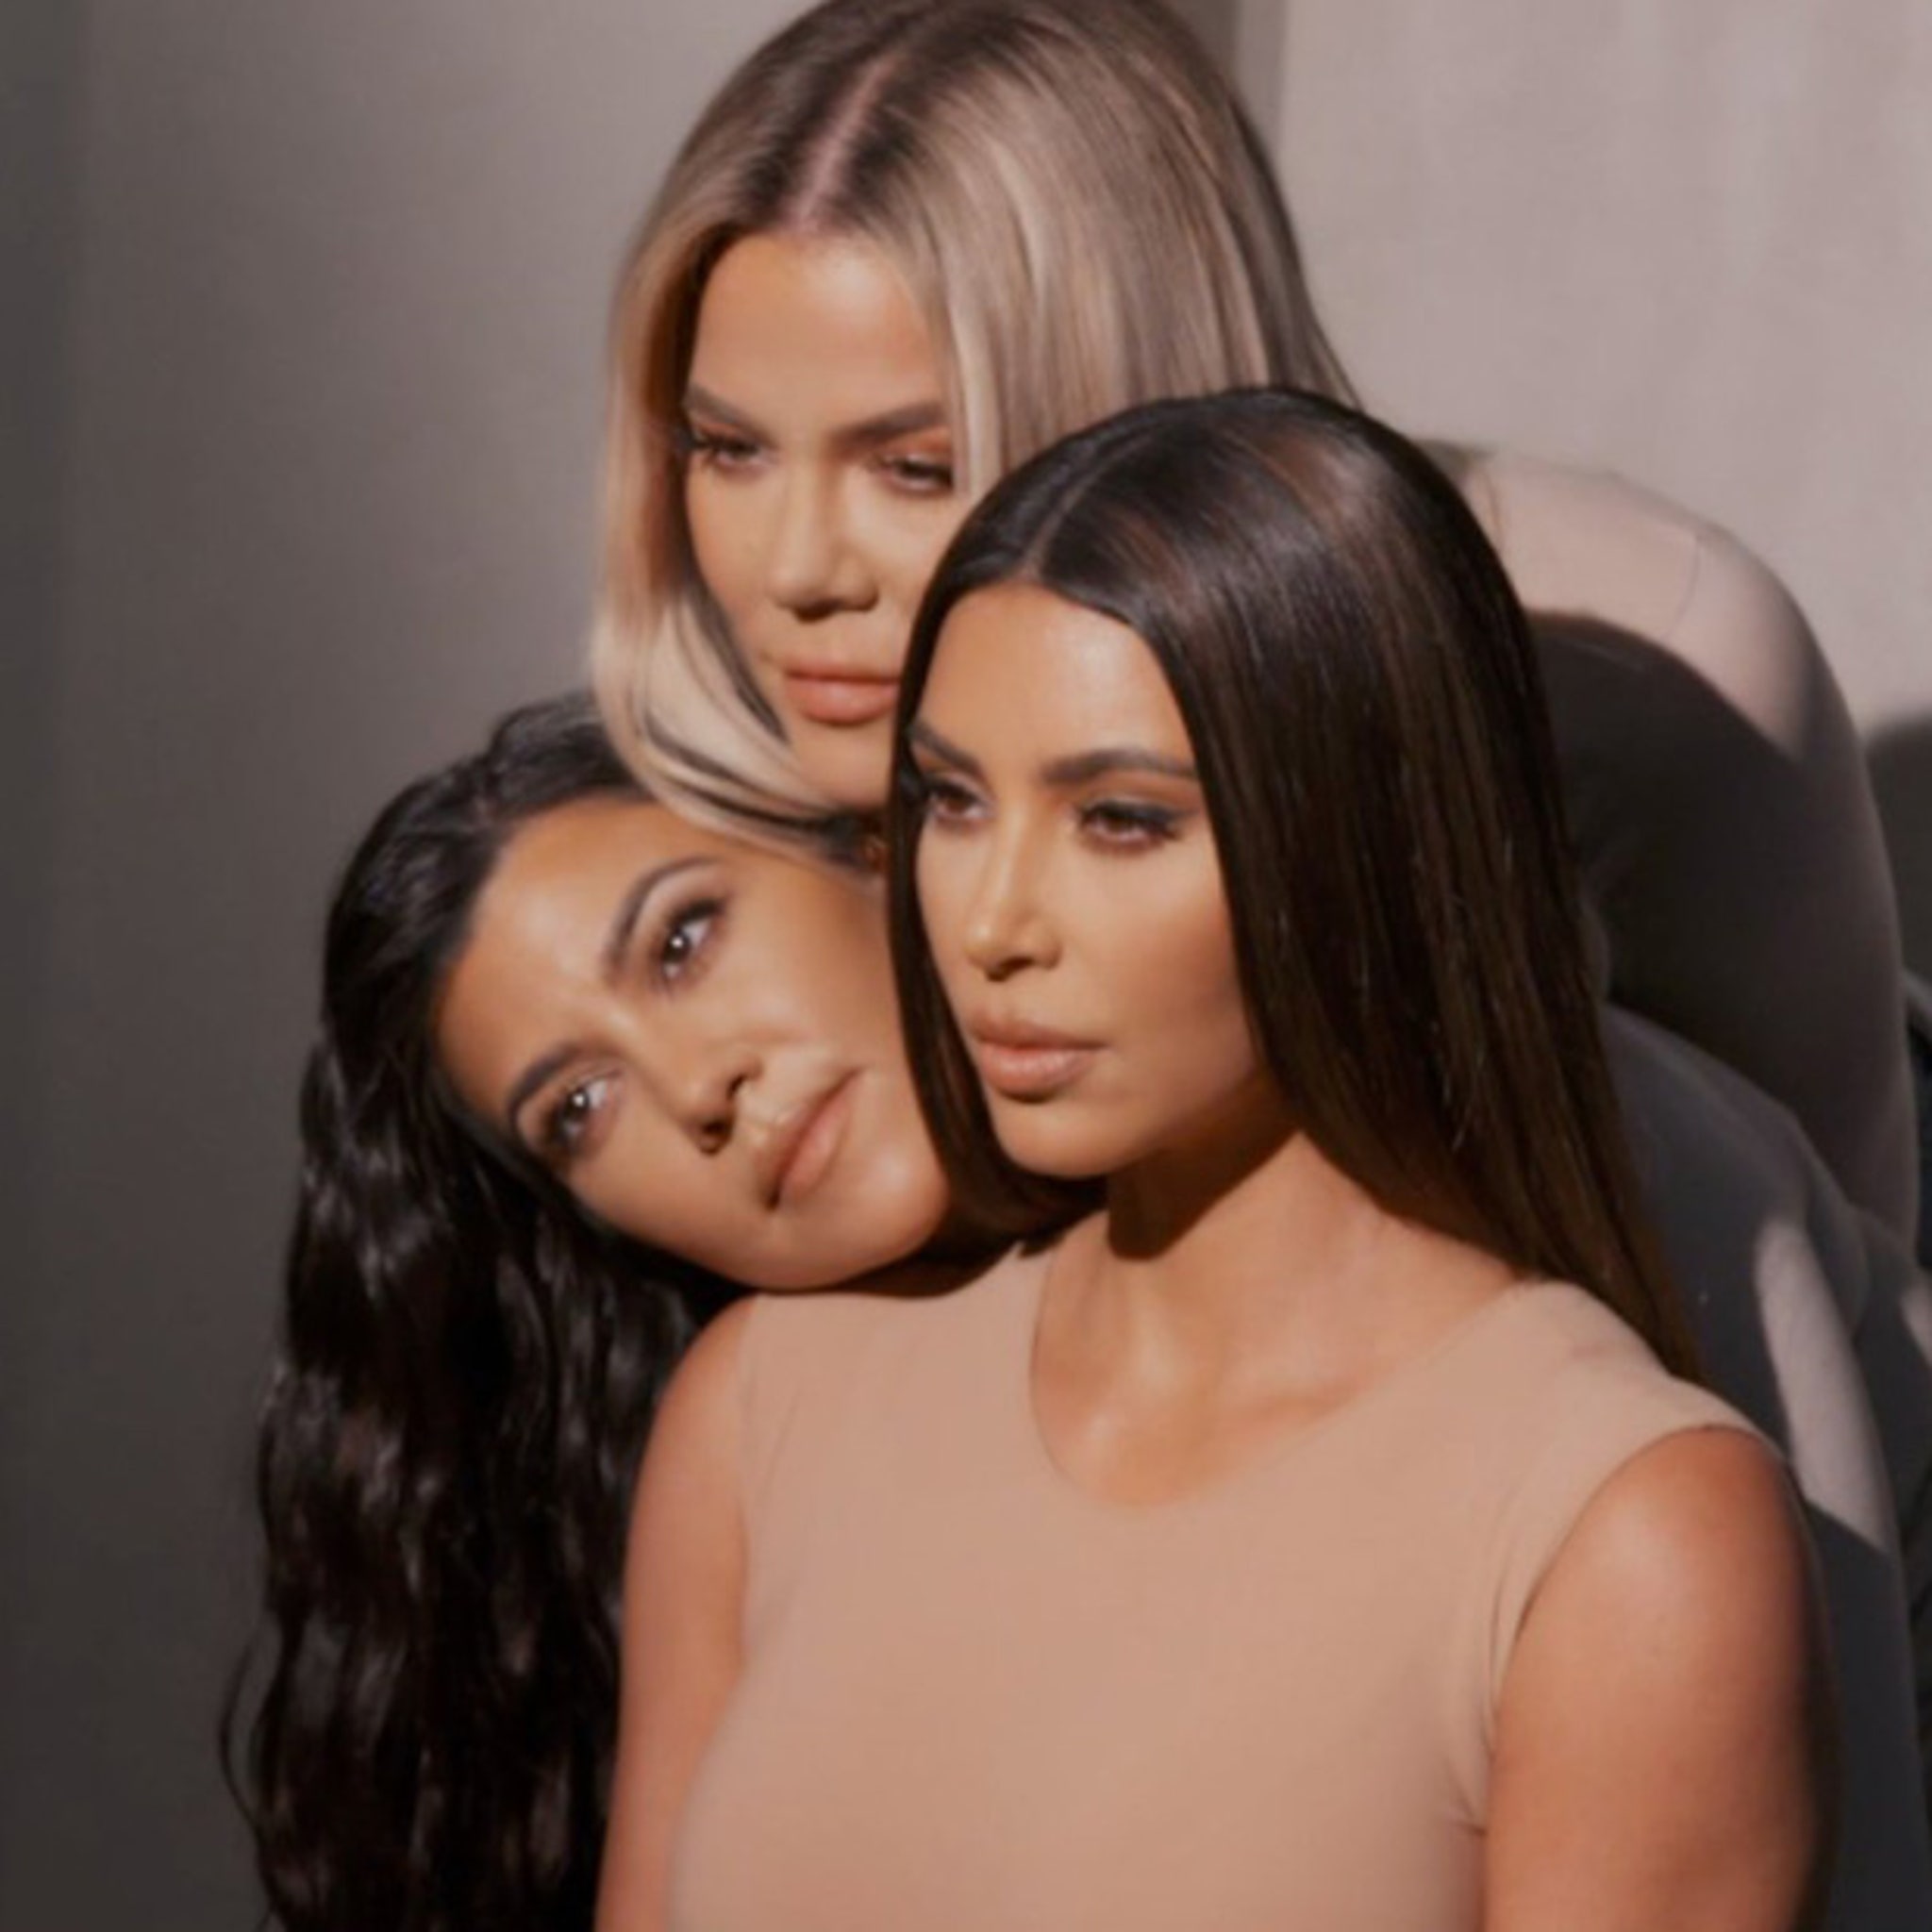 Inside 'Keeping Up With the Kardashians' Filming During Quarantine